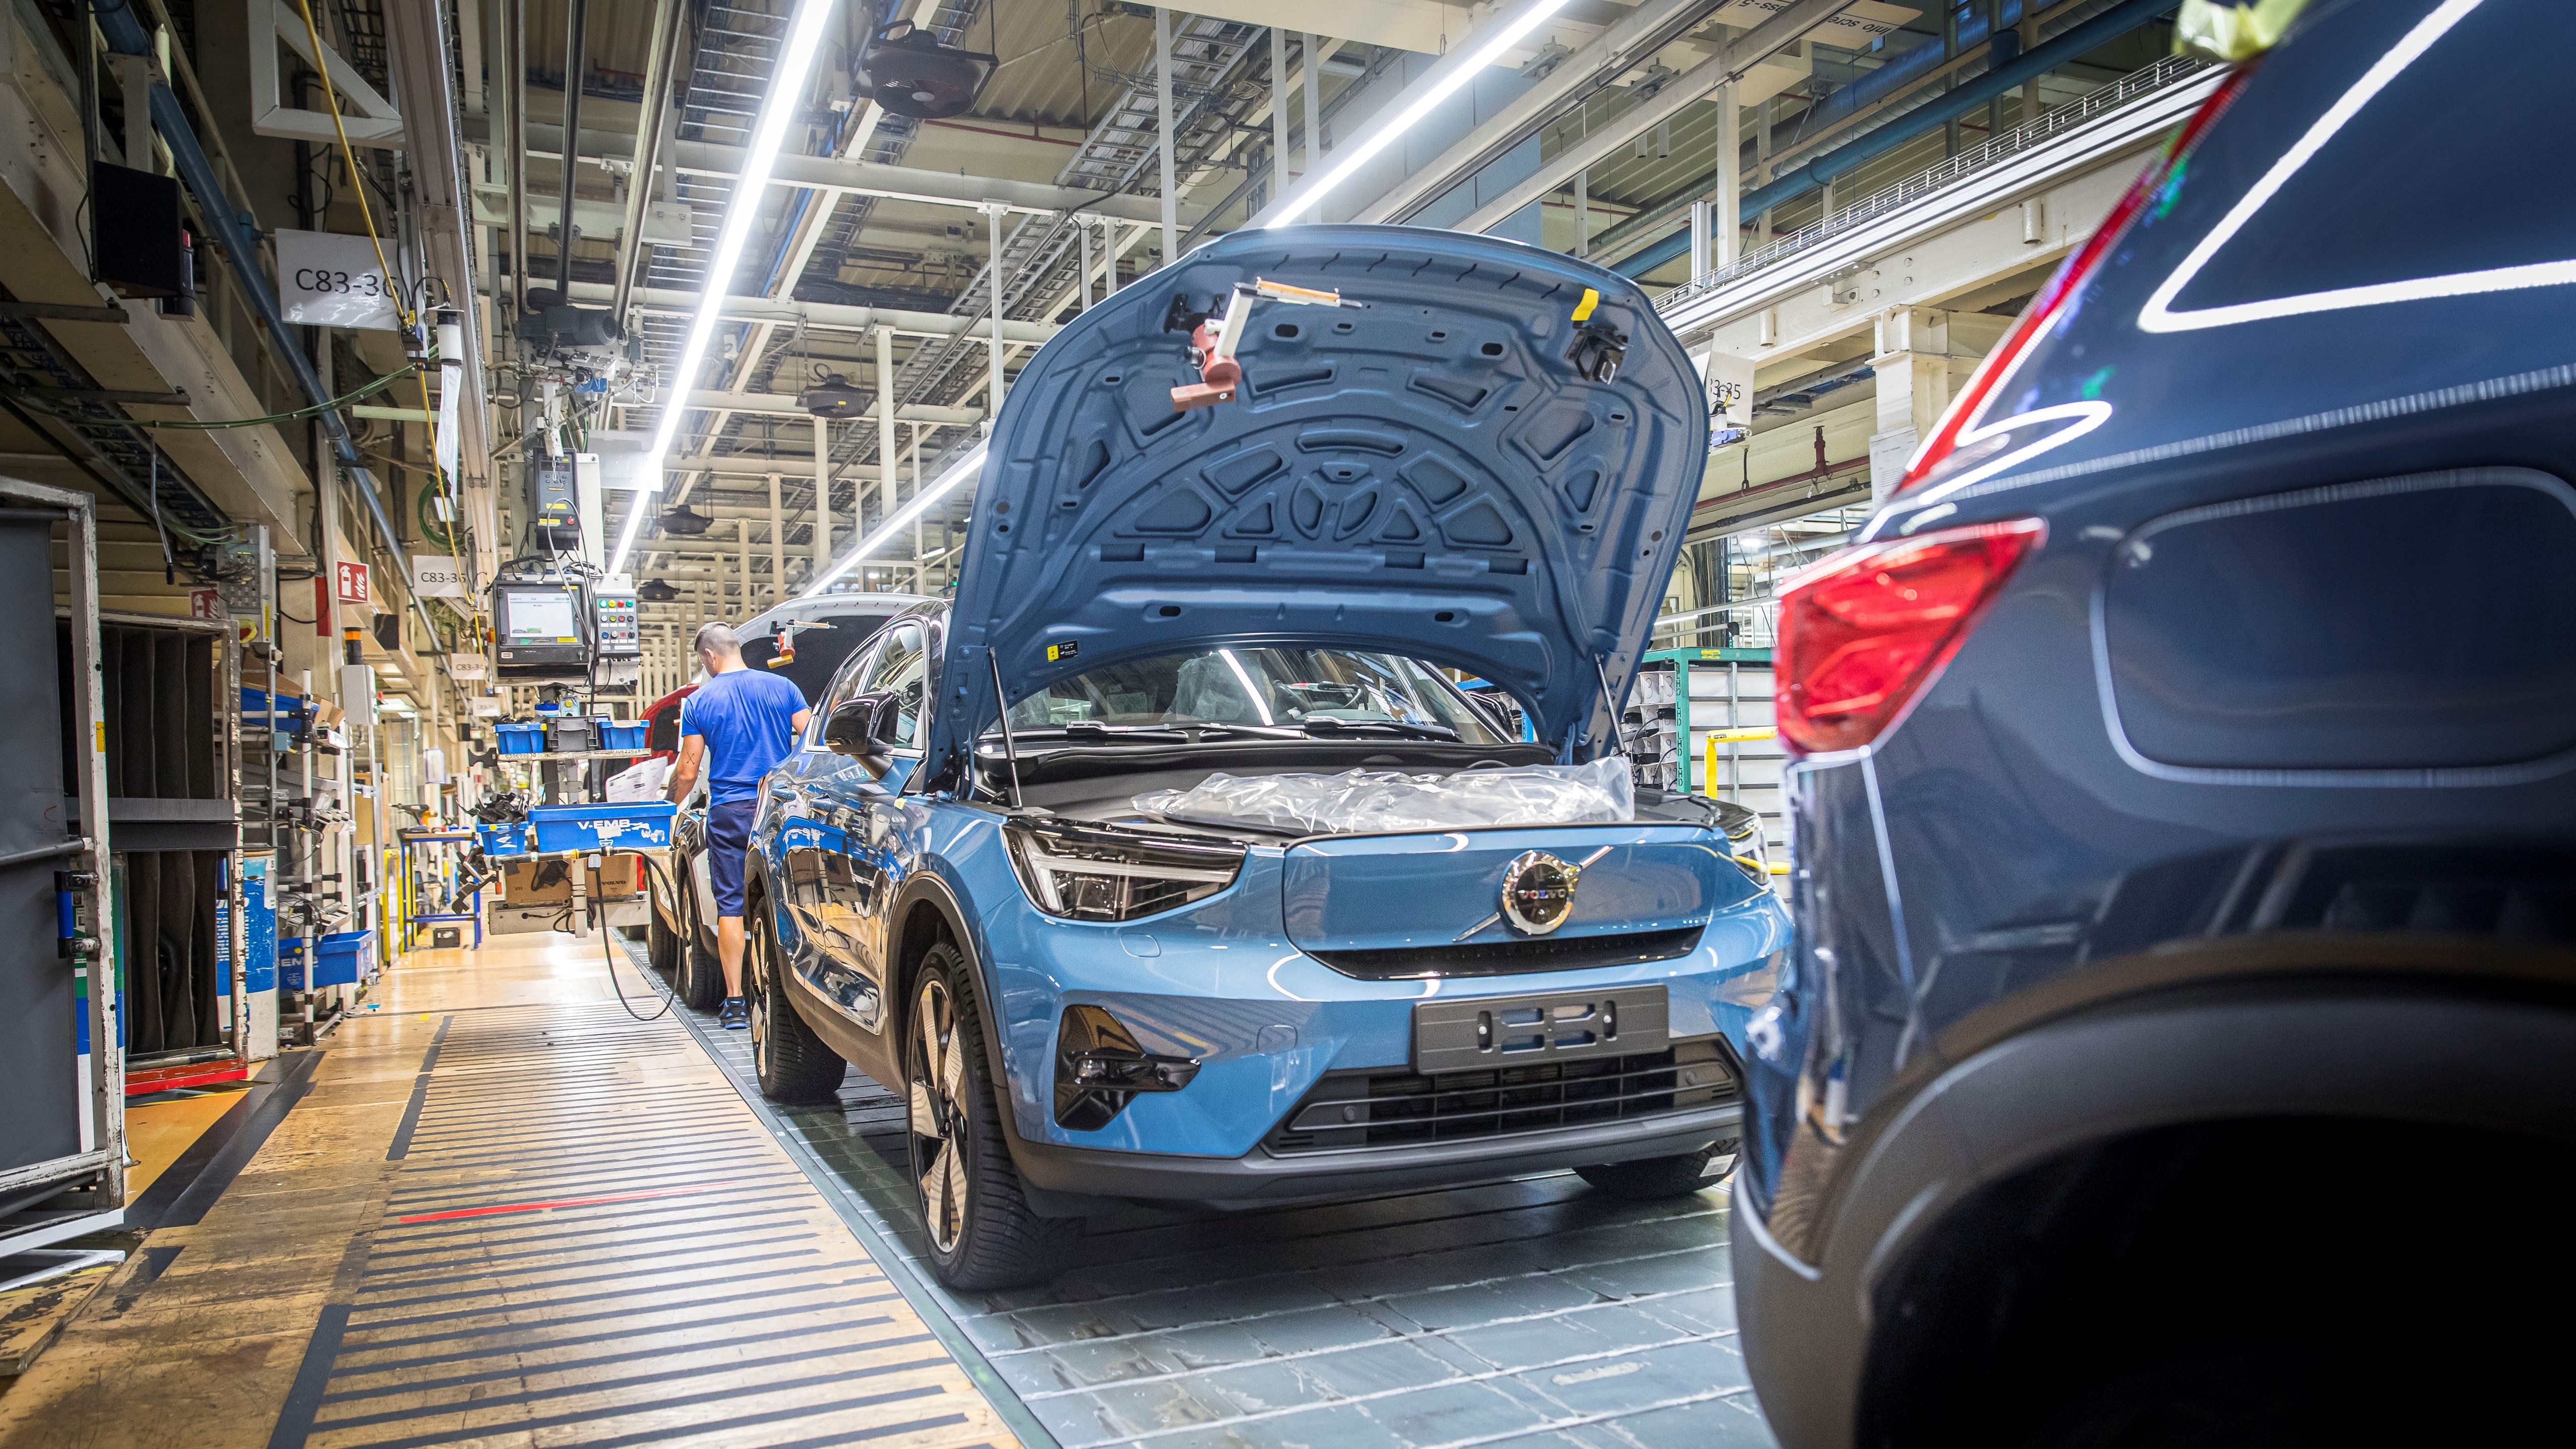 Production of the C40 starts